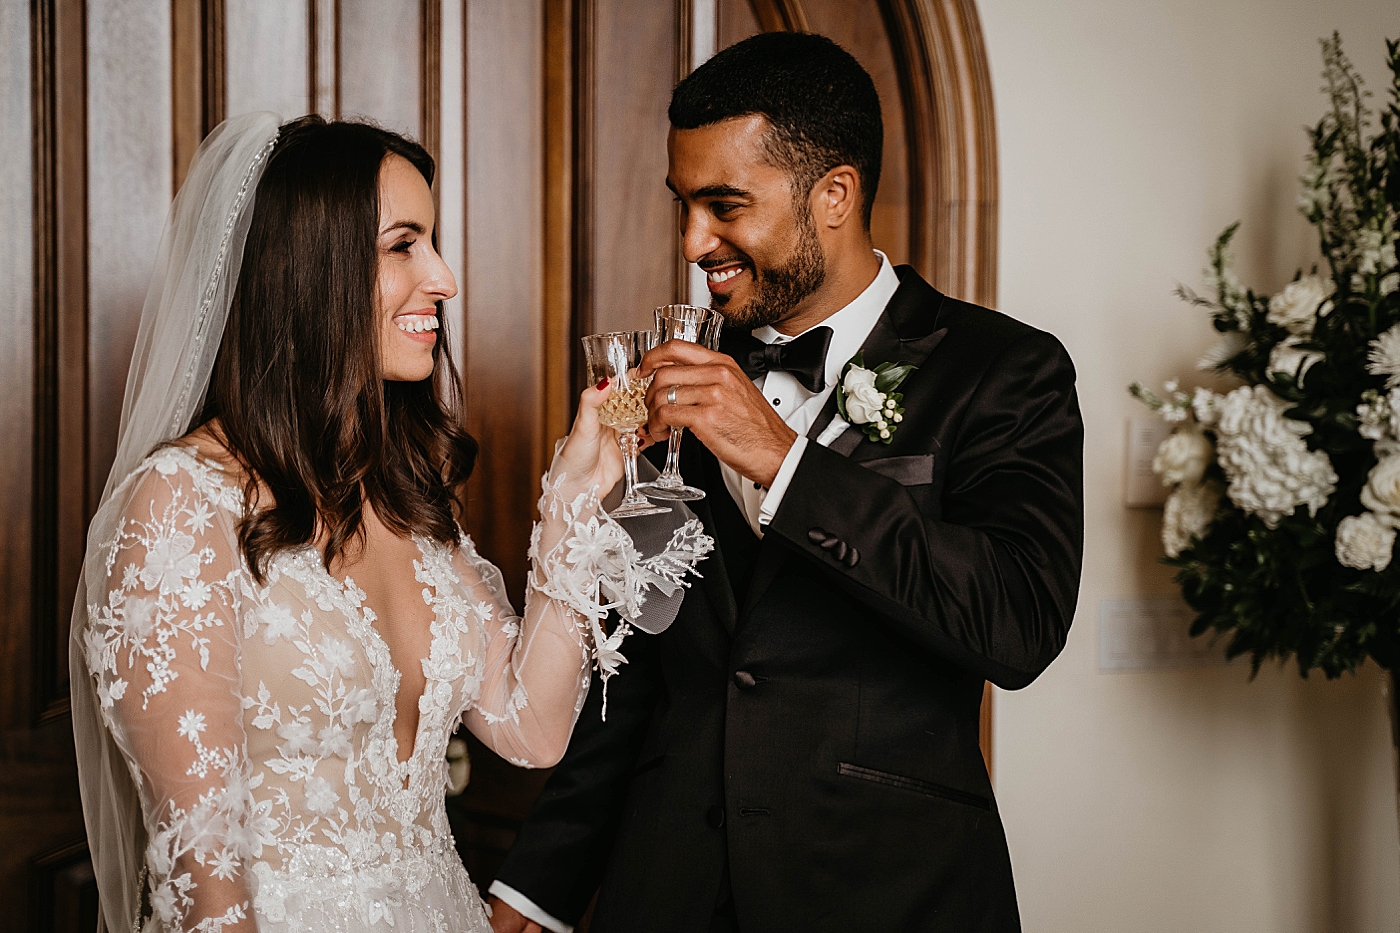 Bride and Groom having a cheers Intimate Home Wedding captured by South Florida Wedding Photographer Krystal Capone Photography